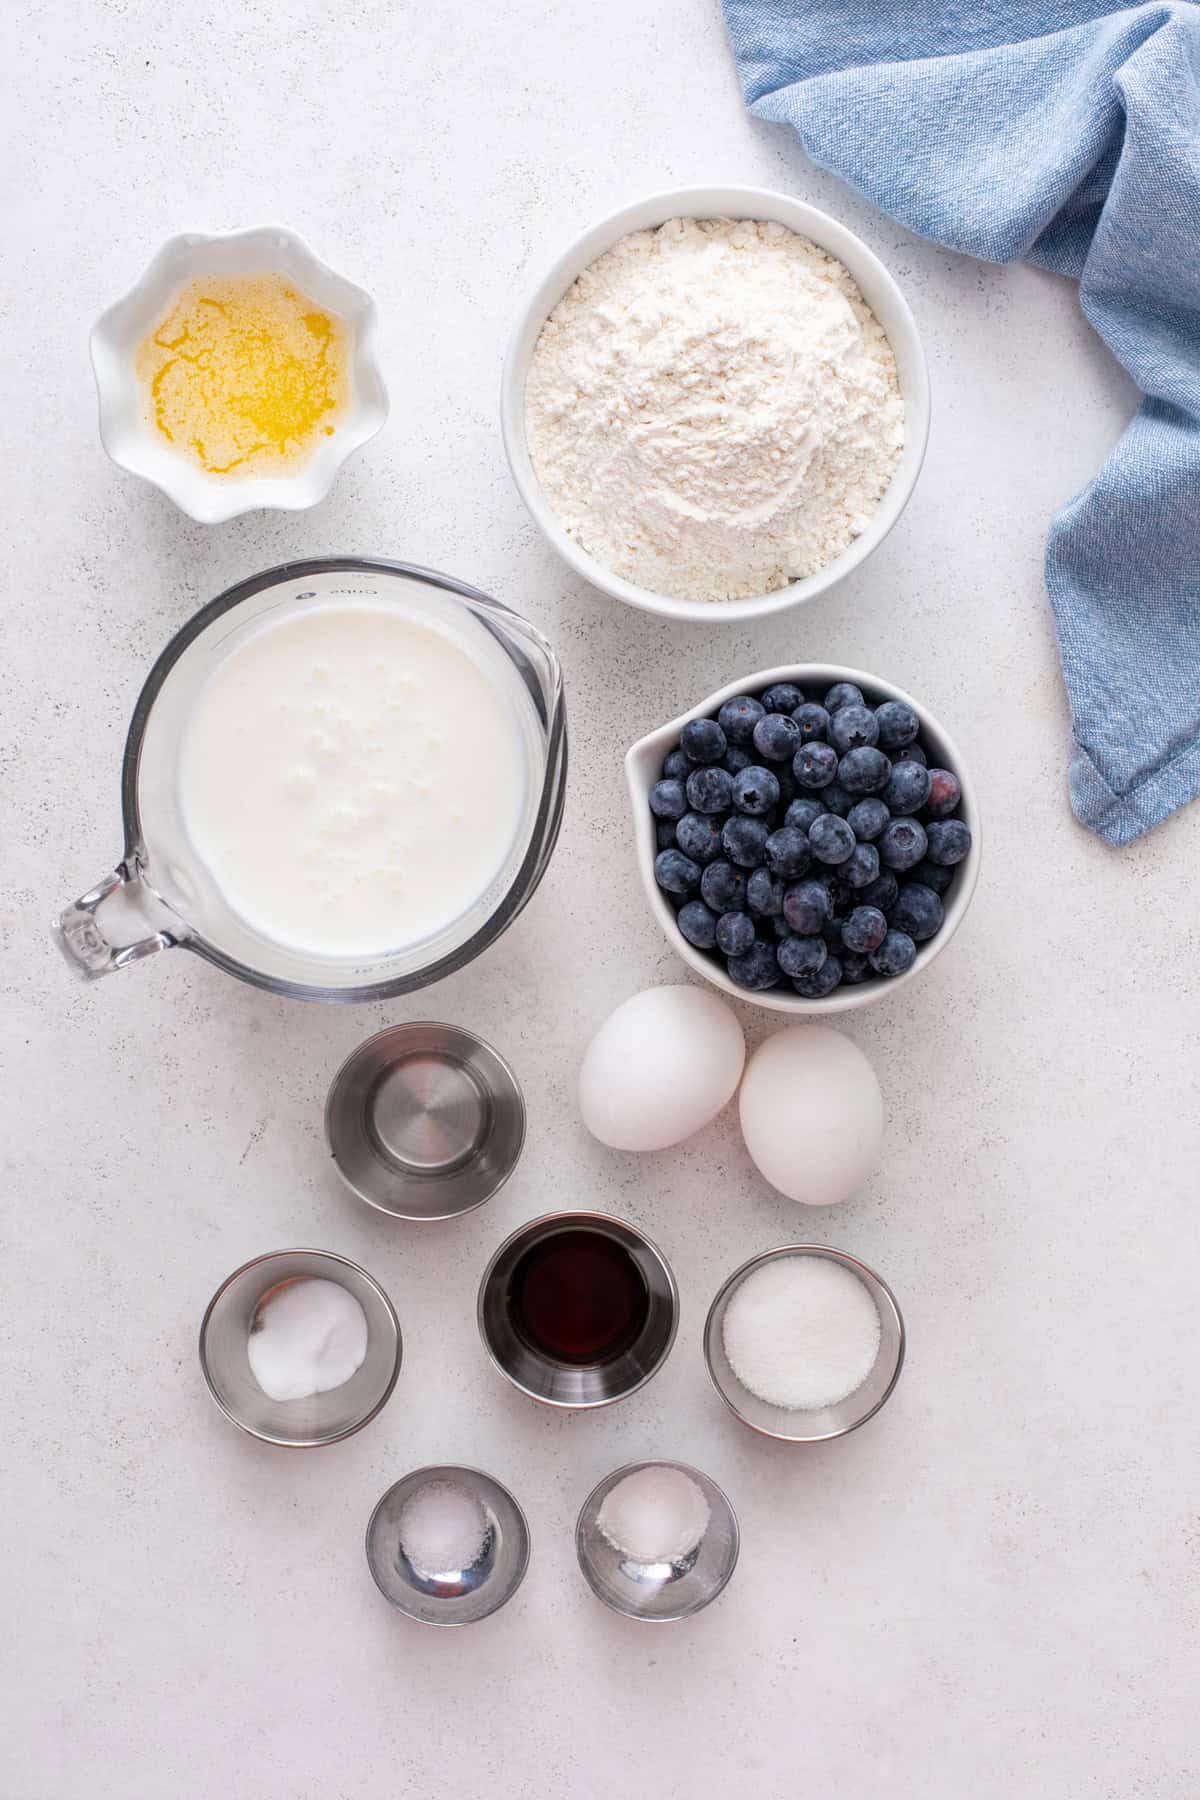 Ingredients for blueberry pancakes arranged on a countertop.